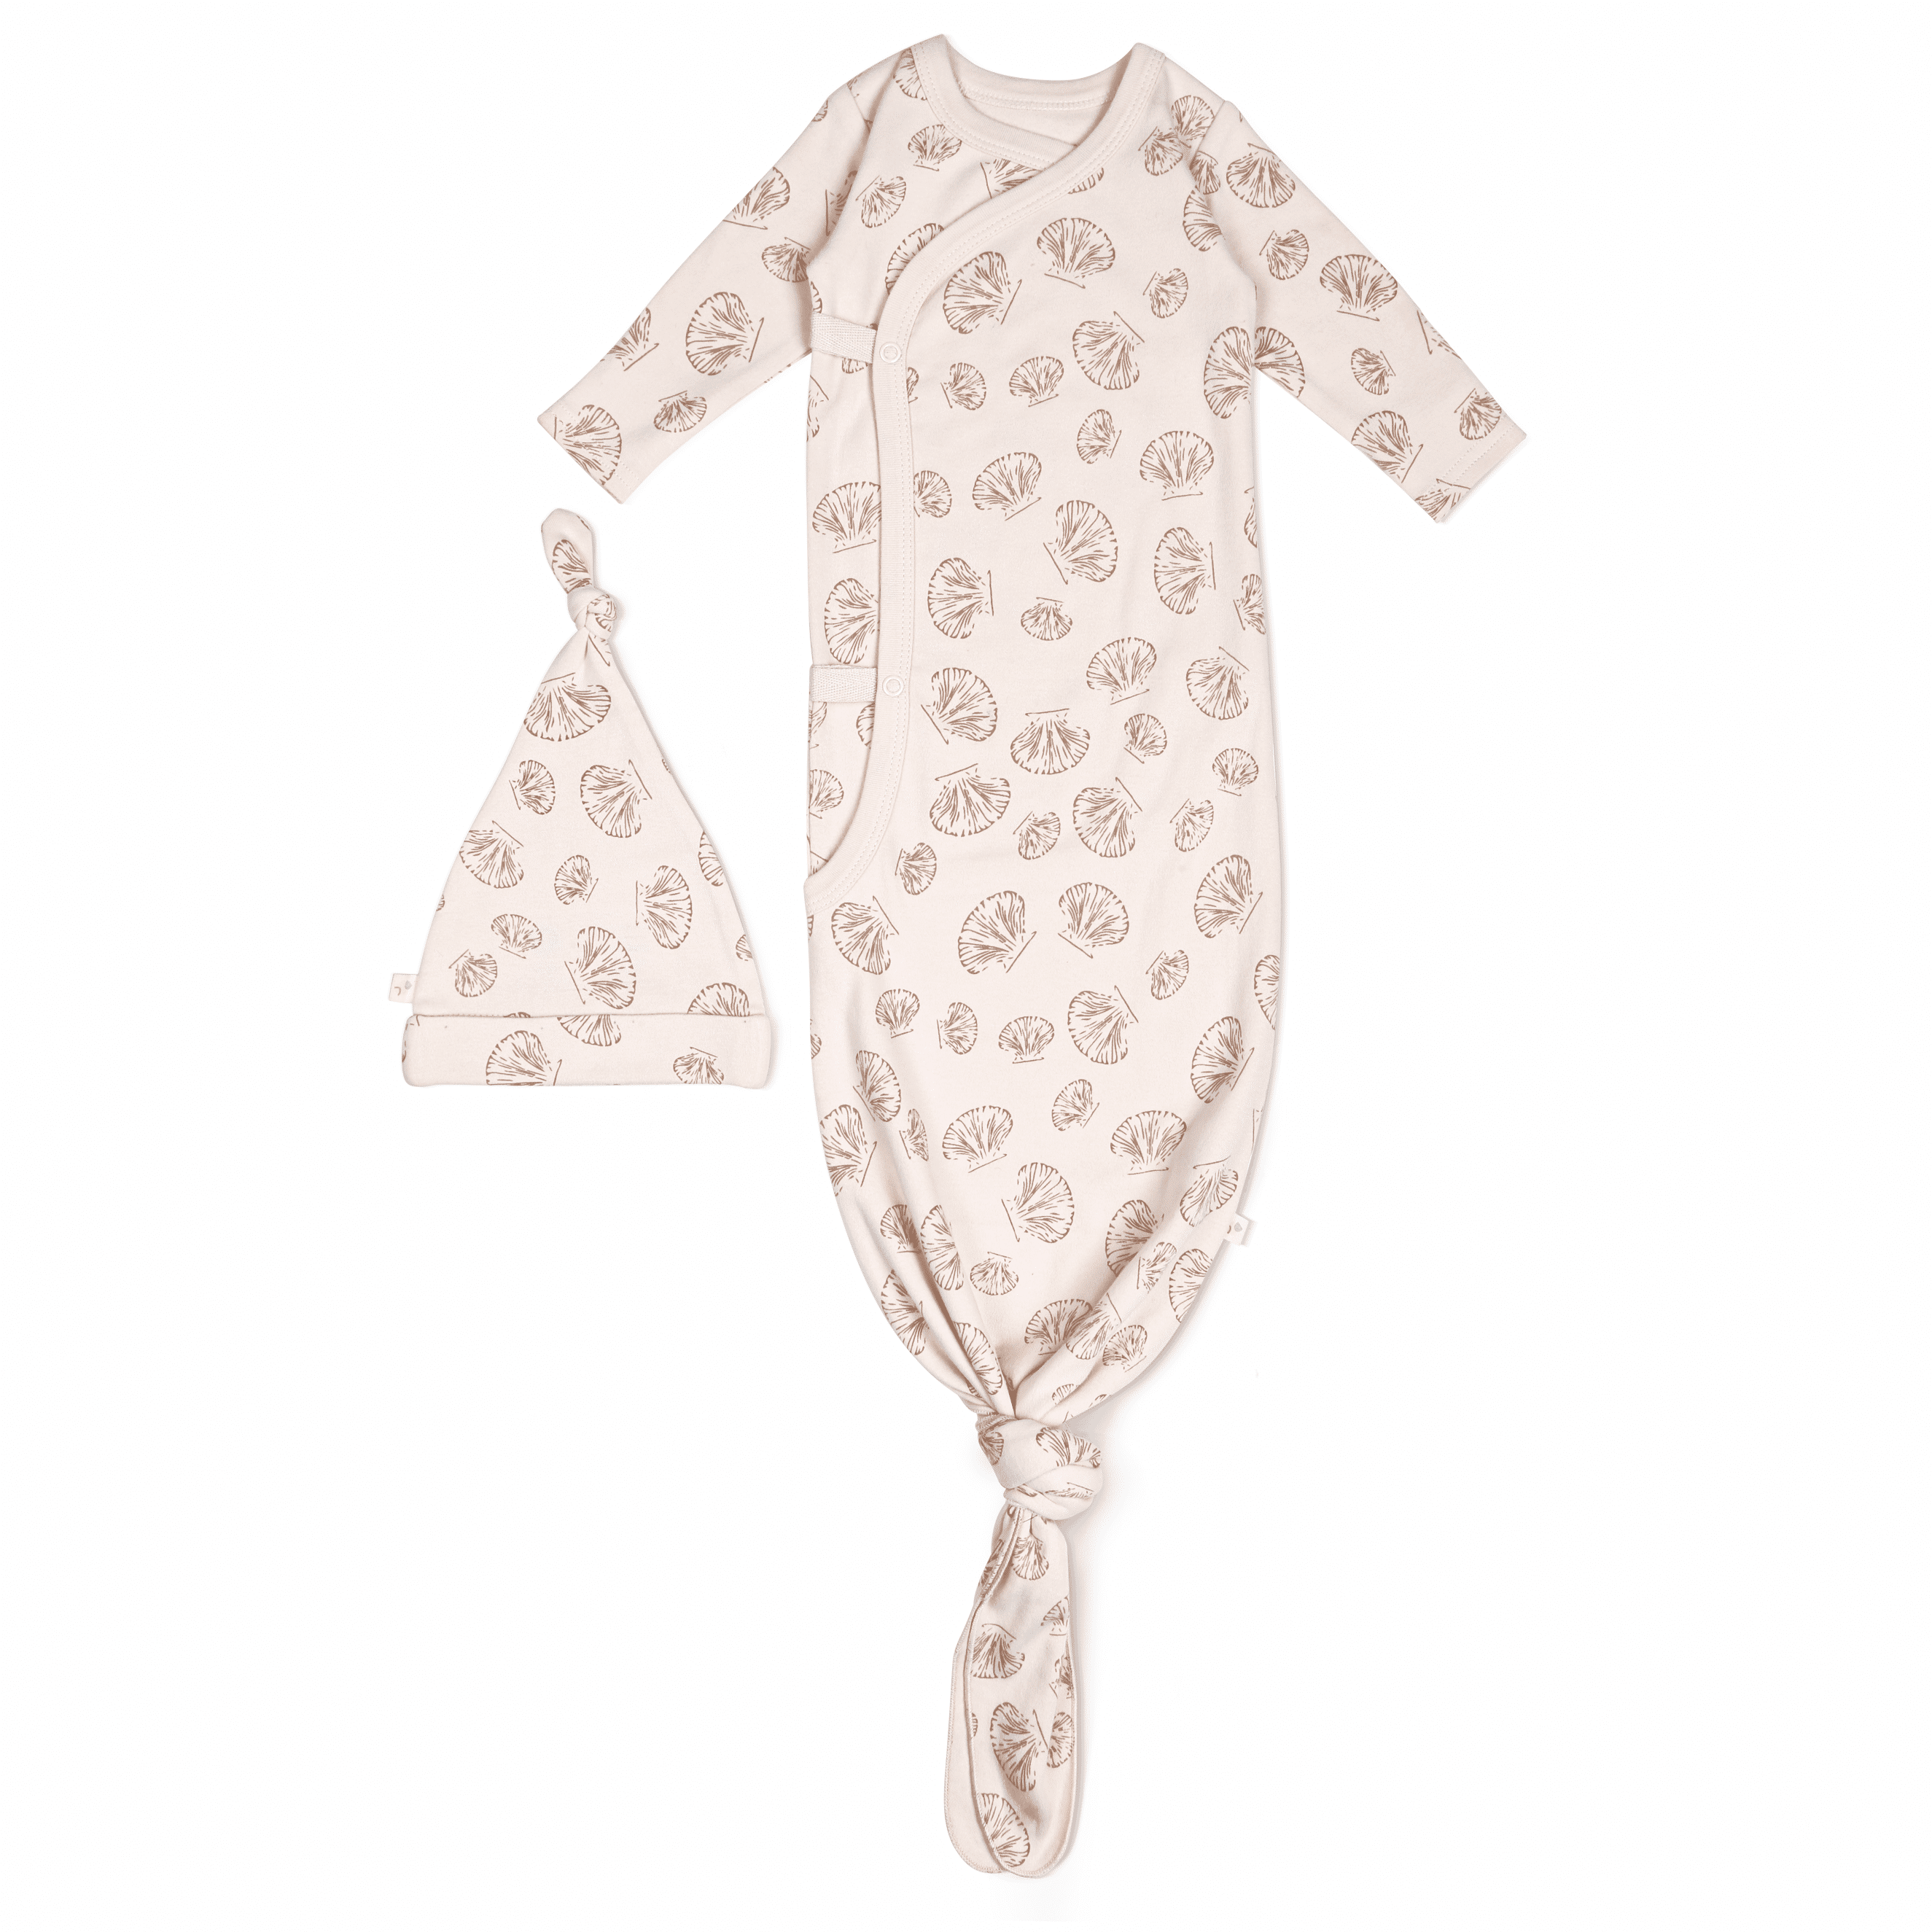 A beige newborn baby Organic Kimono Knotted Sleep Gown in Seashells and matching hat with a leaf pattern, displayed on a white background by Makemake Organics.